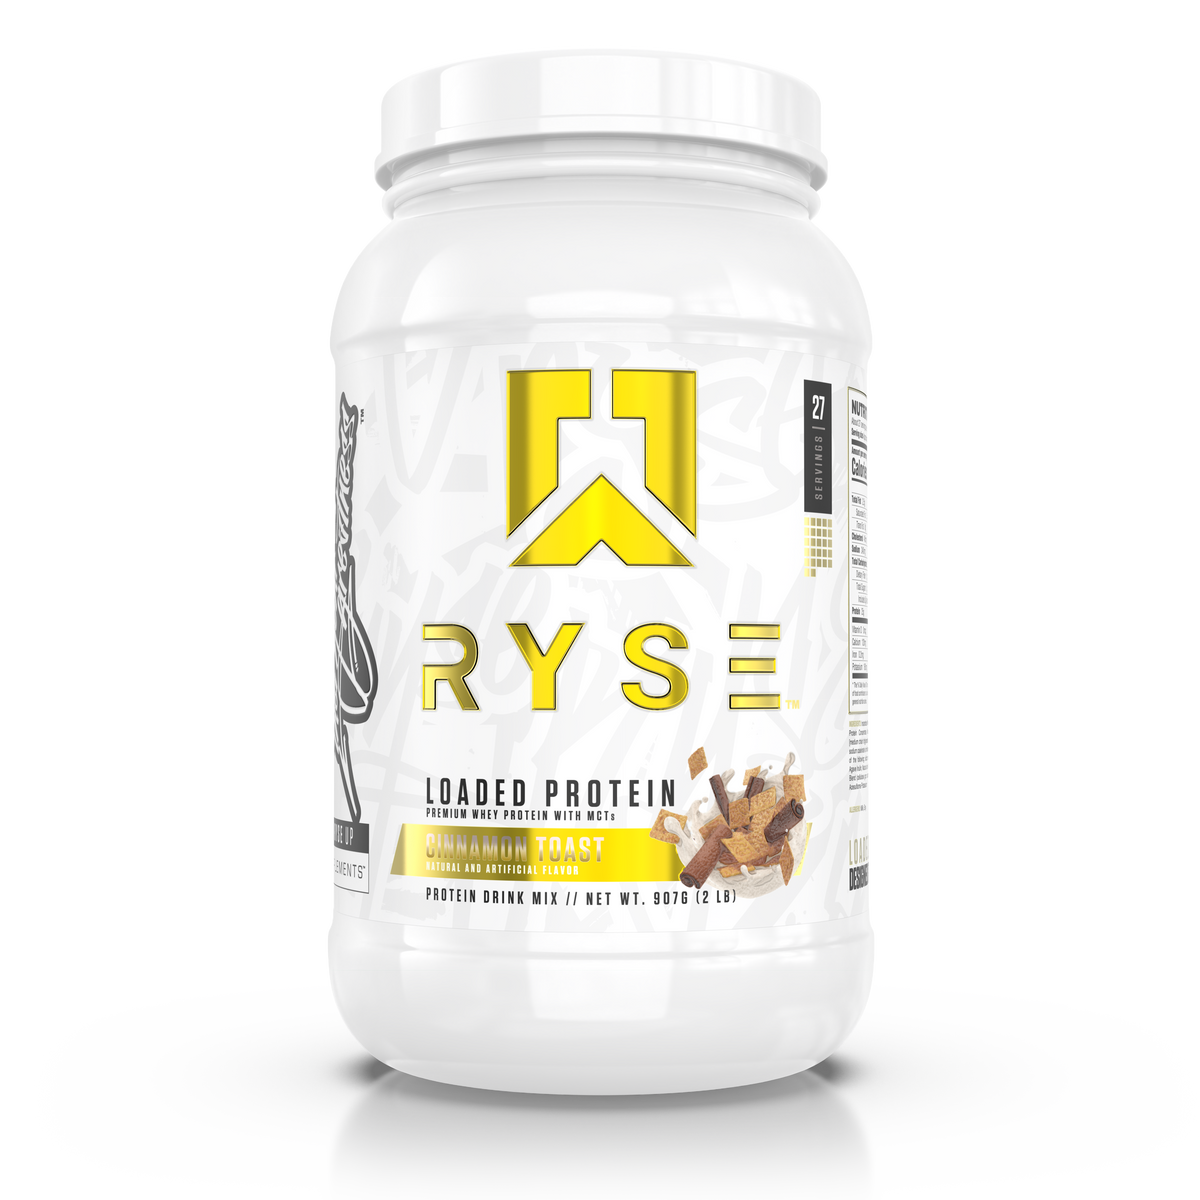 Loaded Premium Whey Protein with MCTs - Jet-Puffed Marshmallow (2 Lbs. / 27  Servings) by Ryse at the Vitamin Shoppe